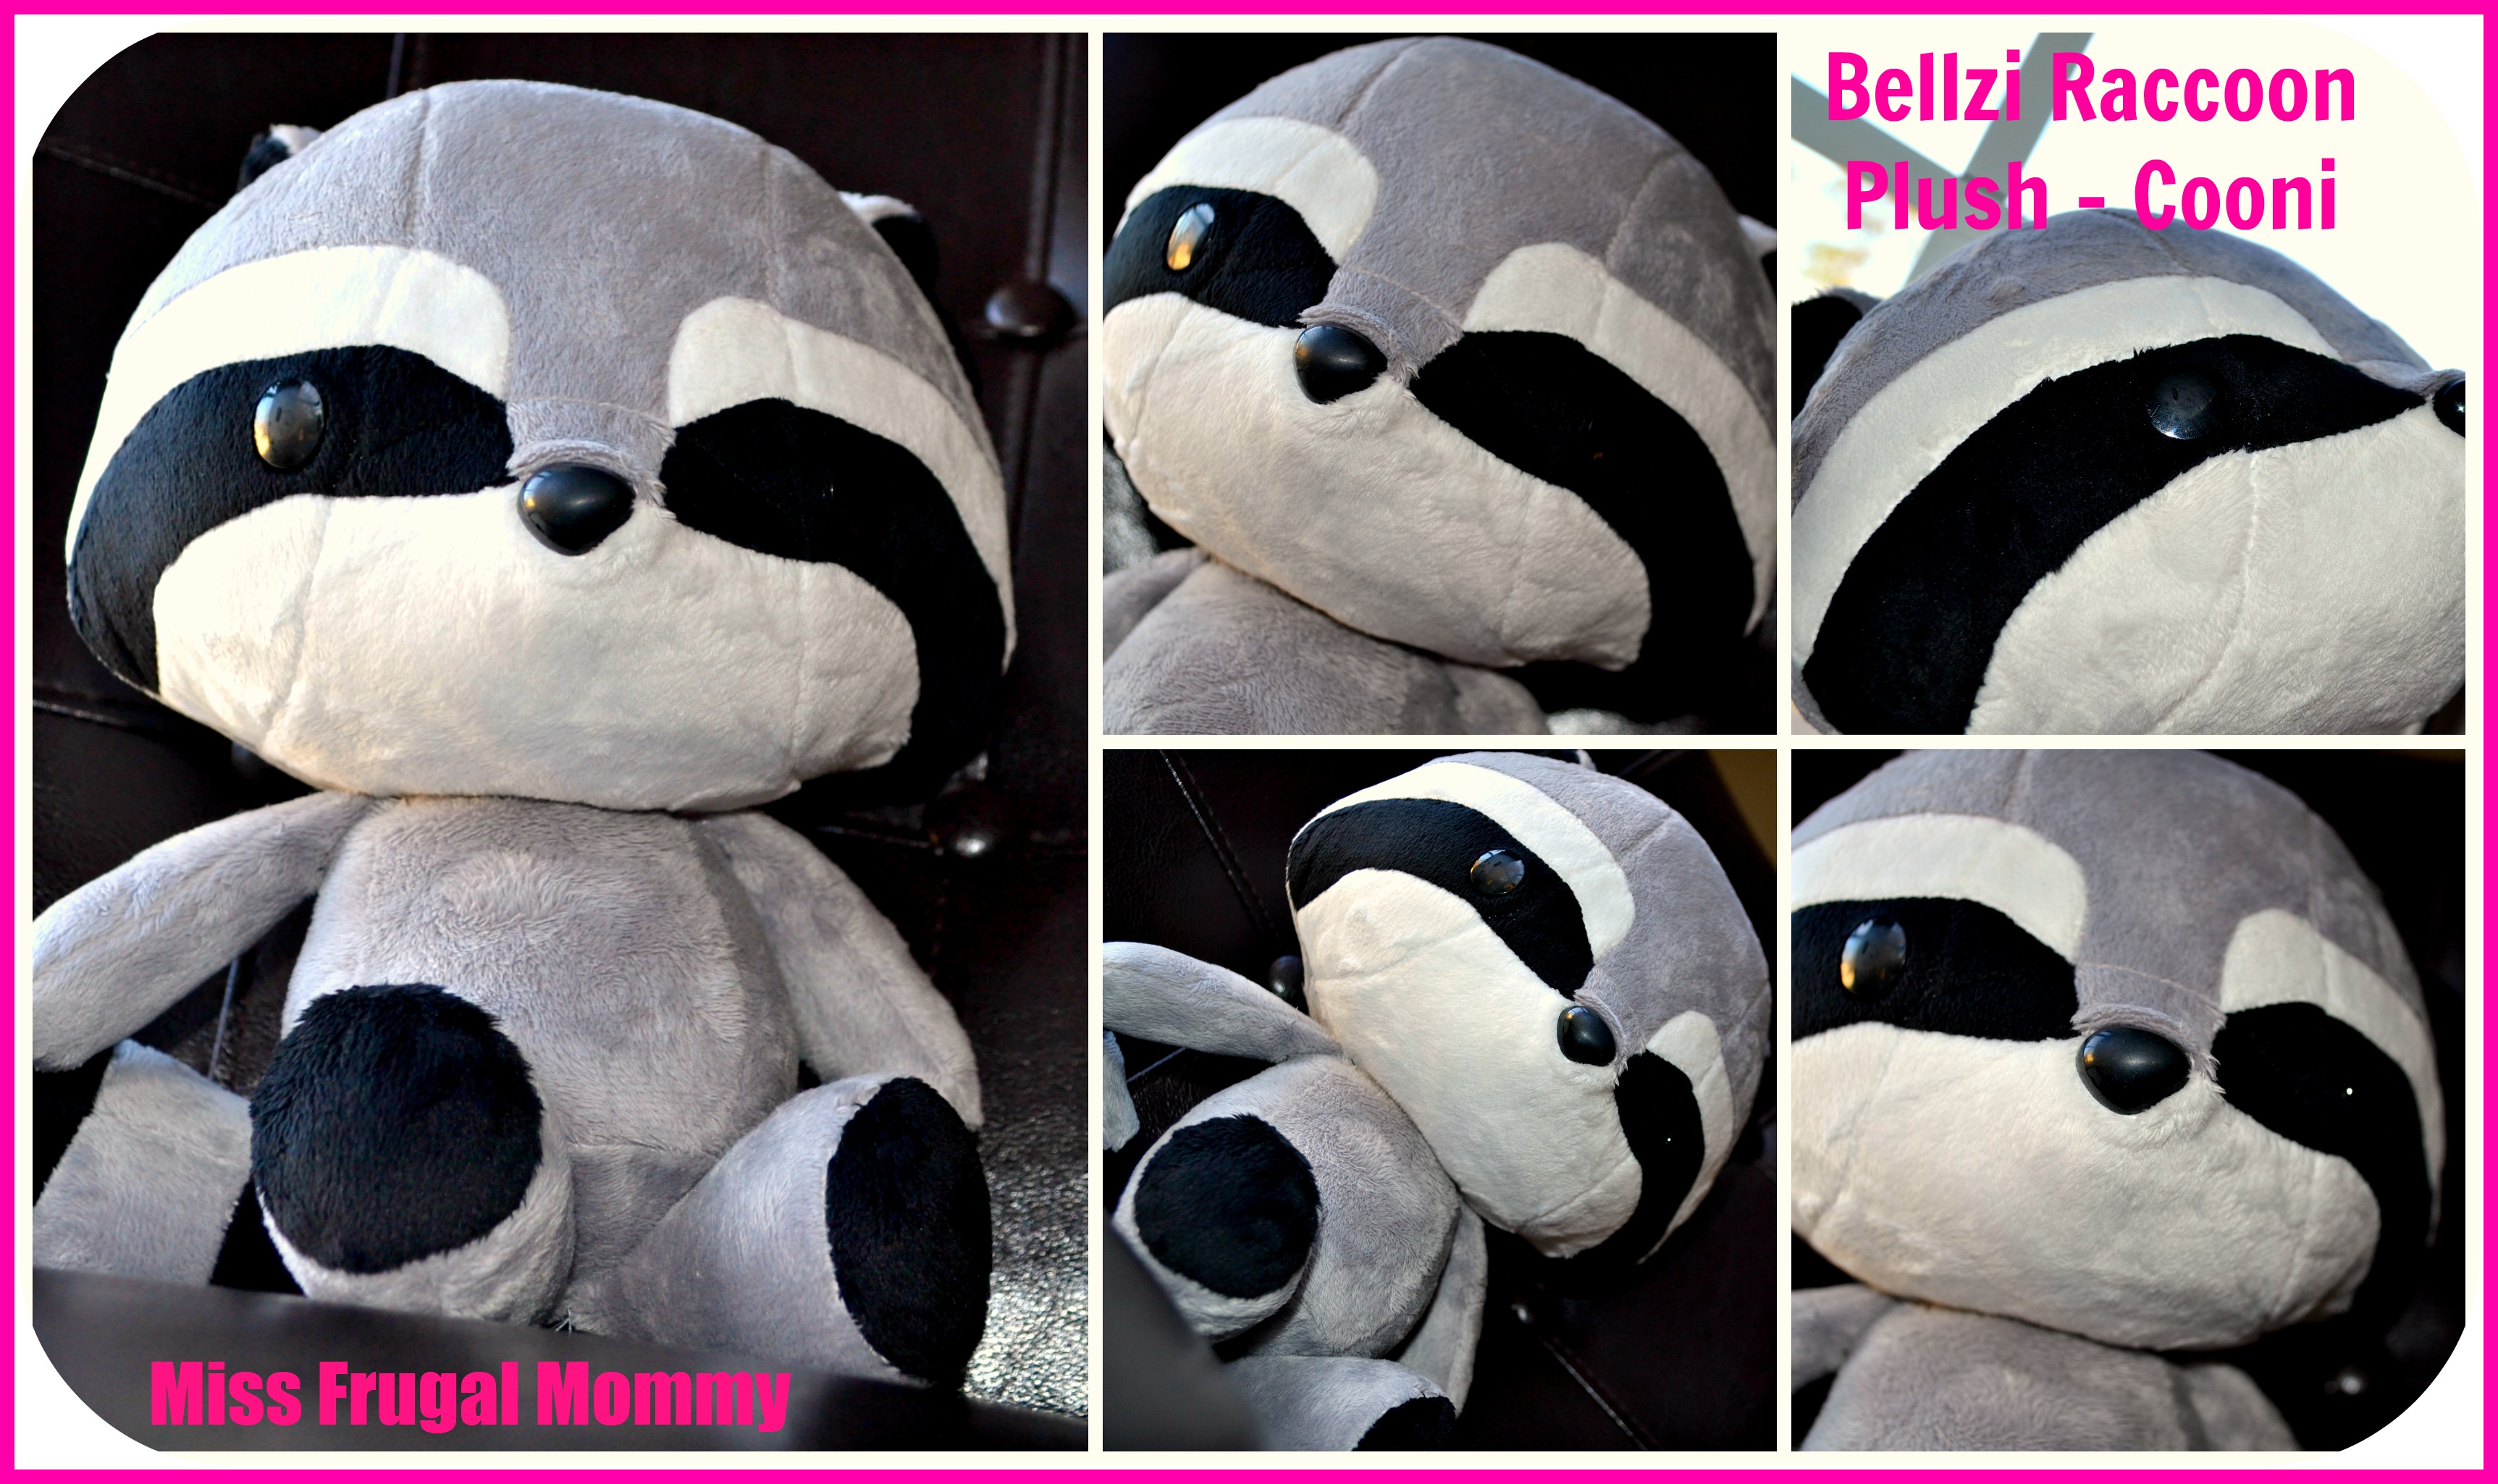 Bellzi Raccoon Plush - Cooni Review (Getting Ready For Baby Gift Guide)